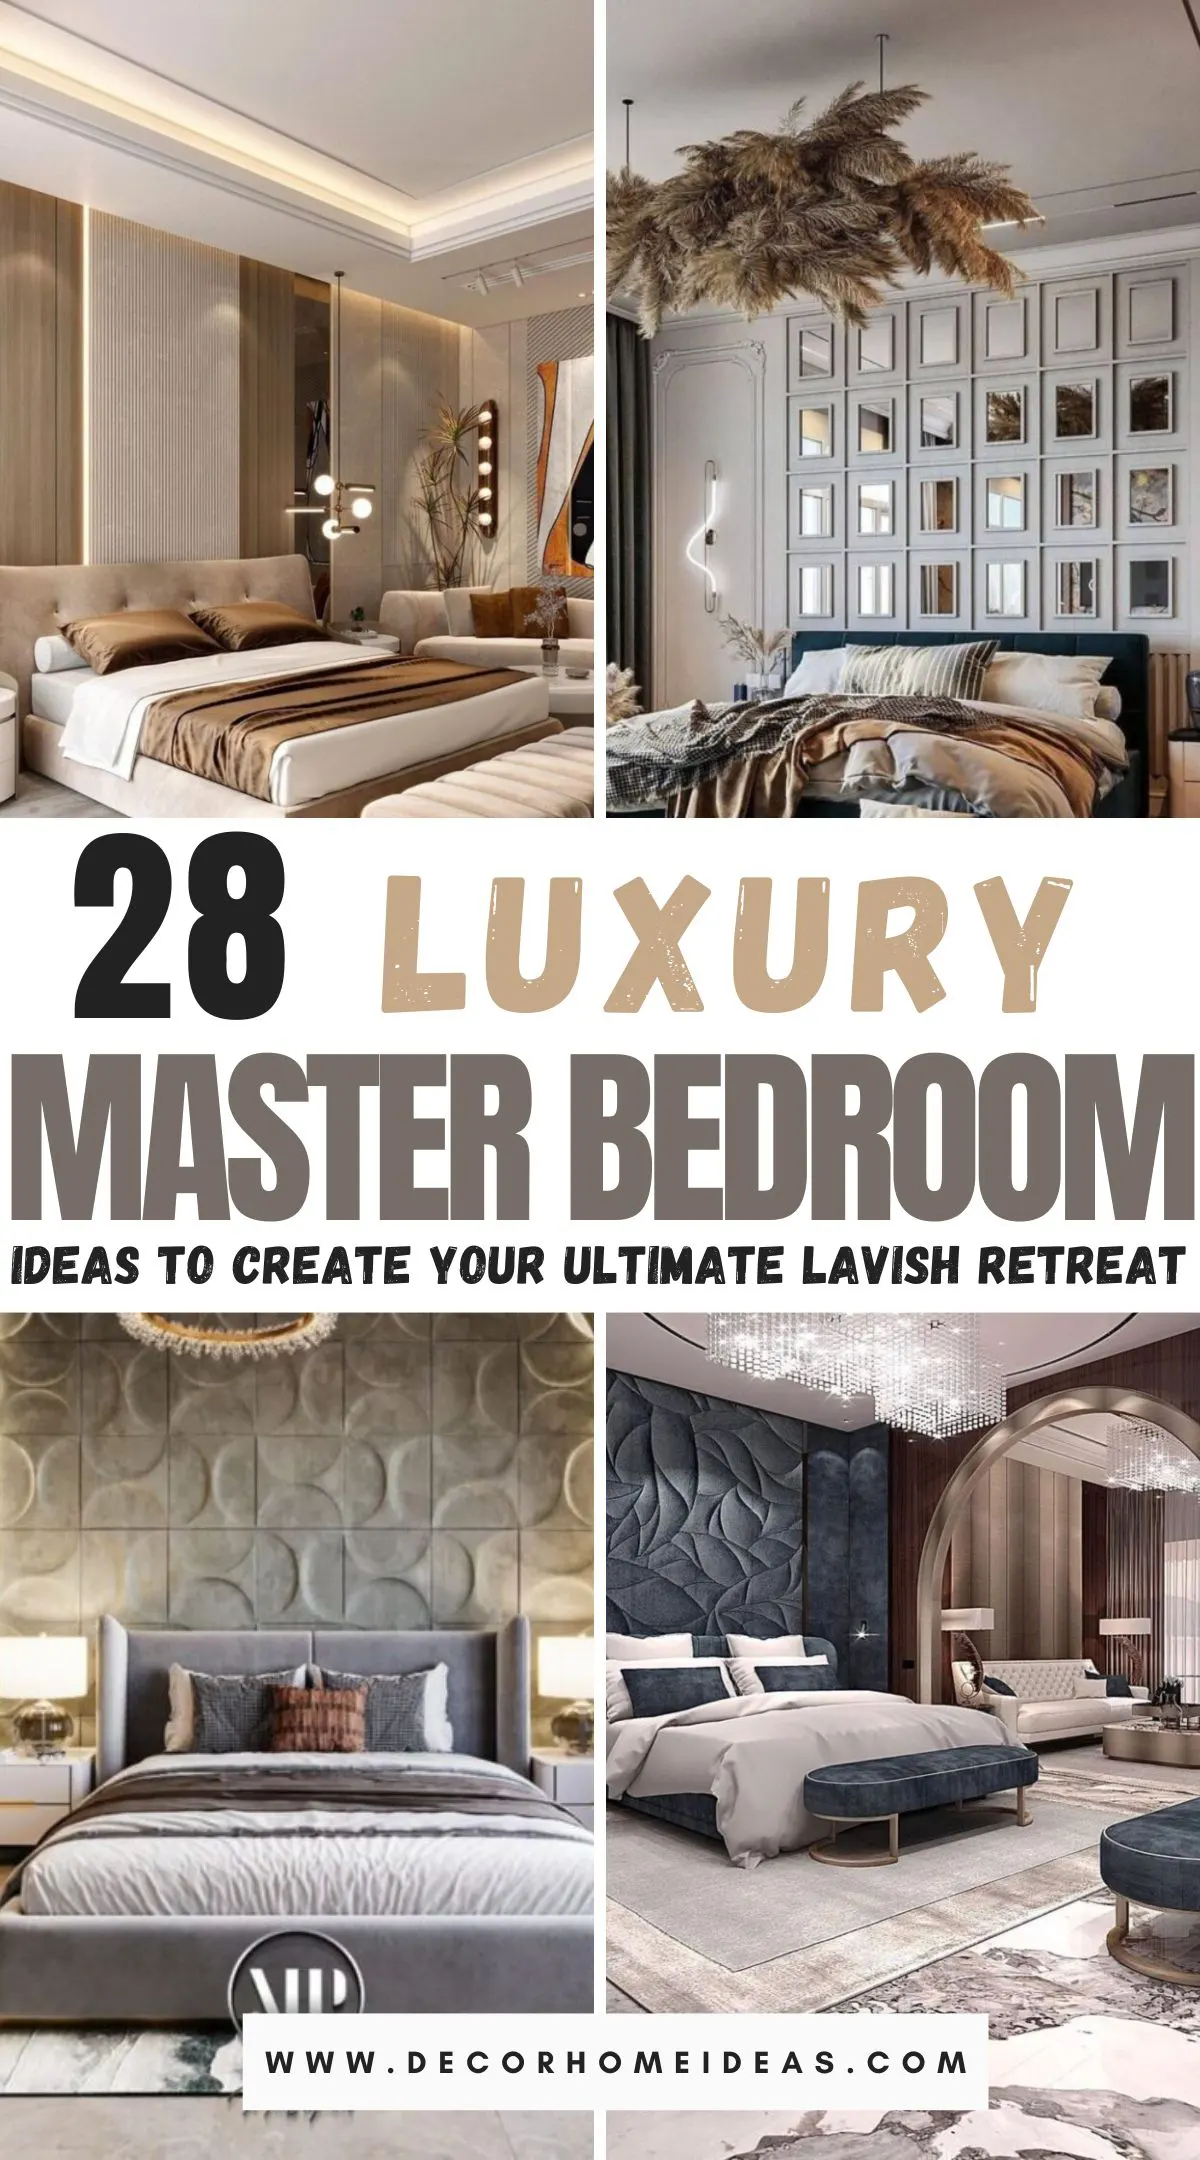 Transform your master bedroom into a lavish retreat with these 28 luxury ideas. Discover elegant design tips, opulent decor inspirations, and sophisticated color palettes that will elevate your space to new heights of comfort and style. Explore now to create the ultimate sanctuary of indulgence and relaxation.